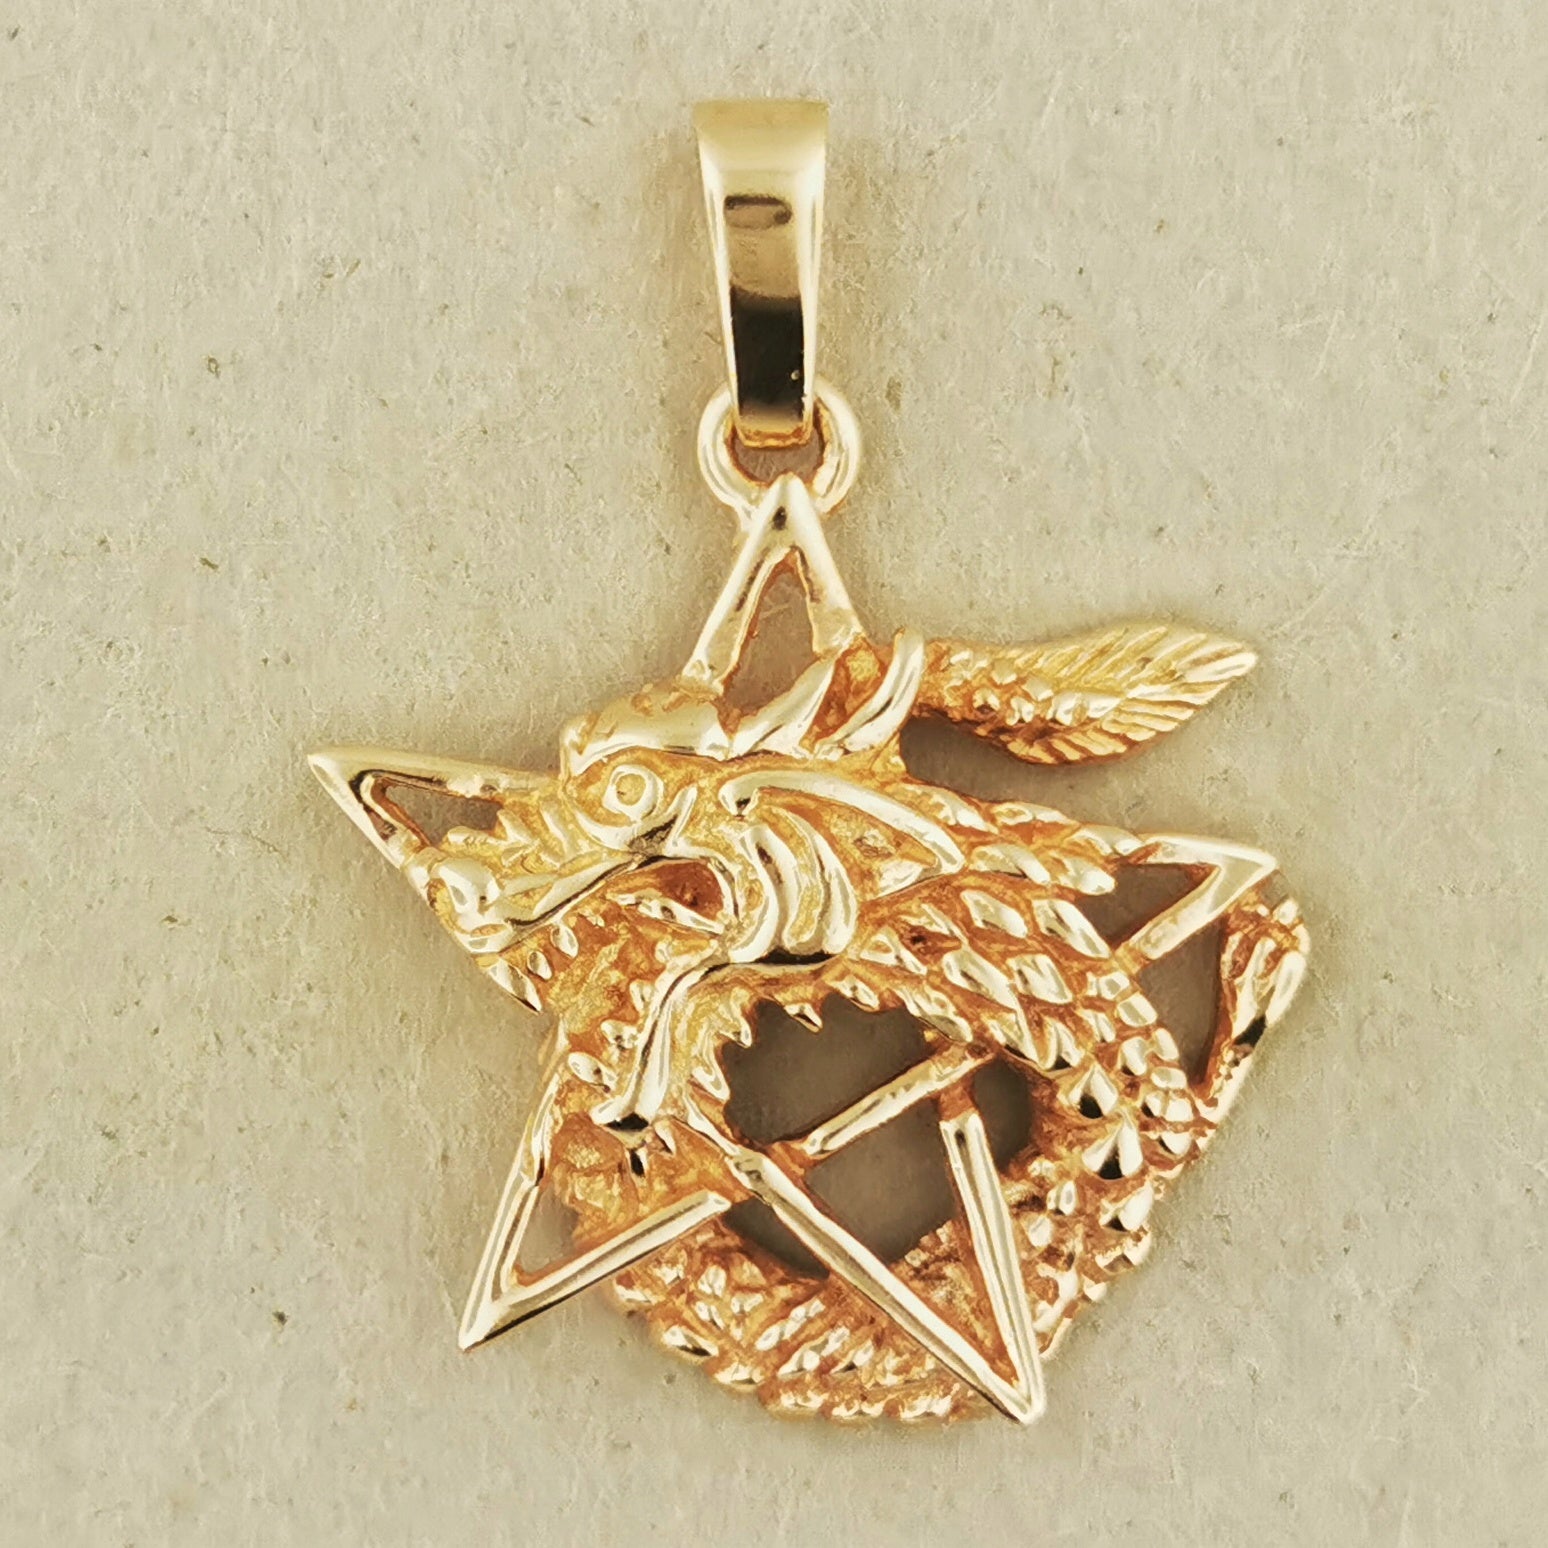 Dragon Pentagram Pendant in 925 Silver or Bronze, Pentacle Pendant Jewelry, Dragon Star Pendant, Jewellery Gift for Wicca, Bronze Dragon Jewellery, Pagan Dragon Pendant, Bronze Pentagram Pendant, Bronze Dragon Jewelry, Bronze Dragon Jewellery